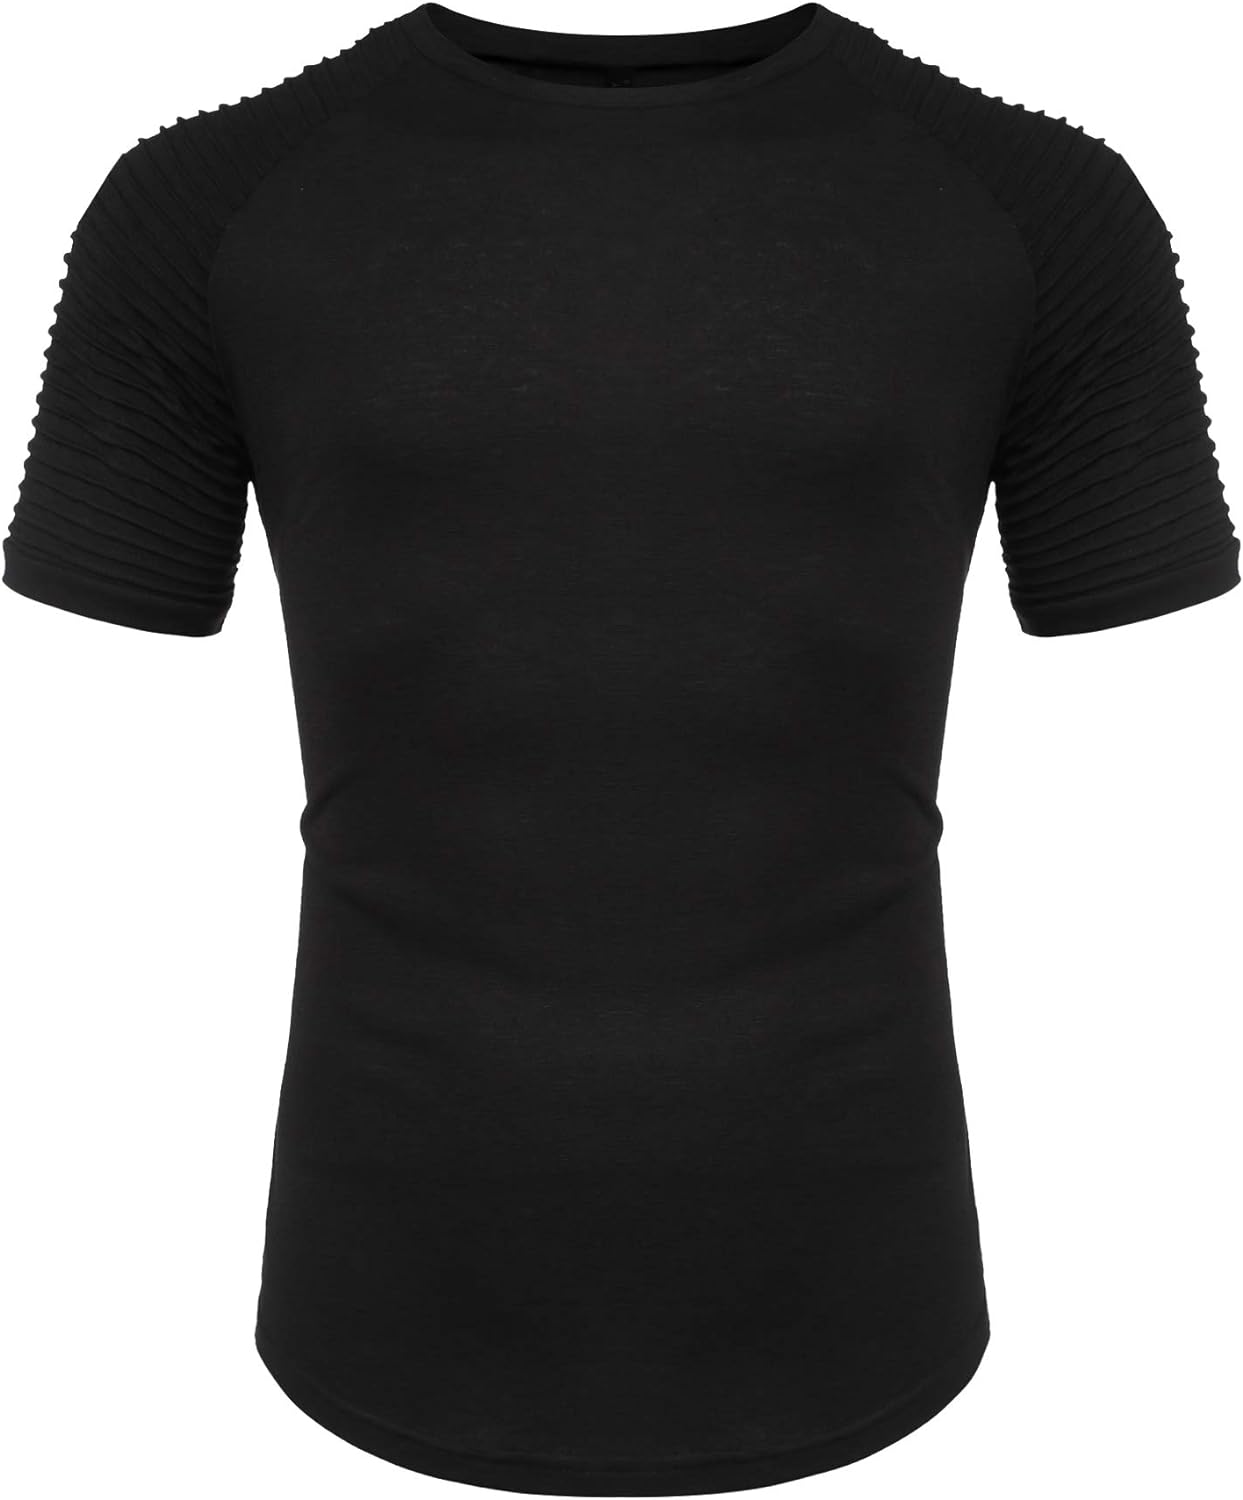 The DUVAL Pleated T-Shirt